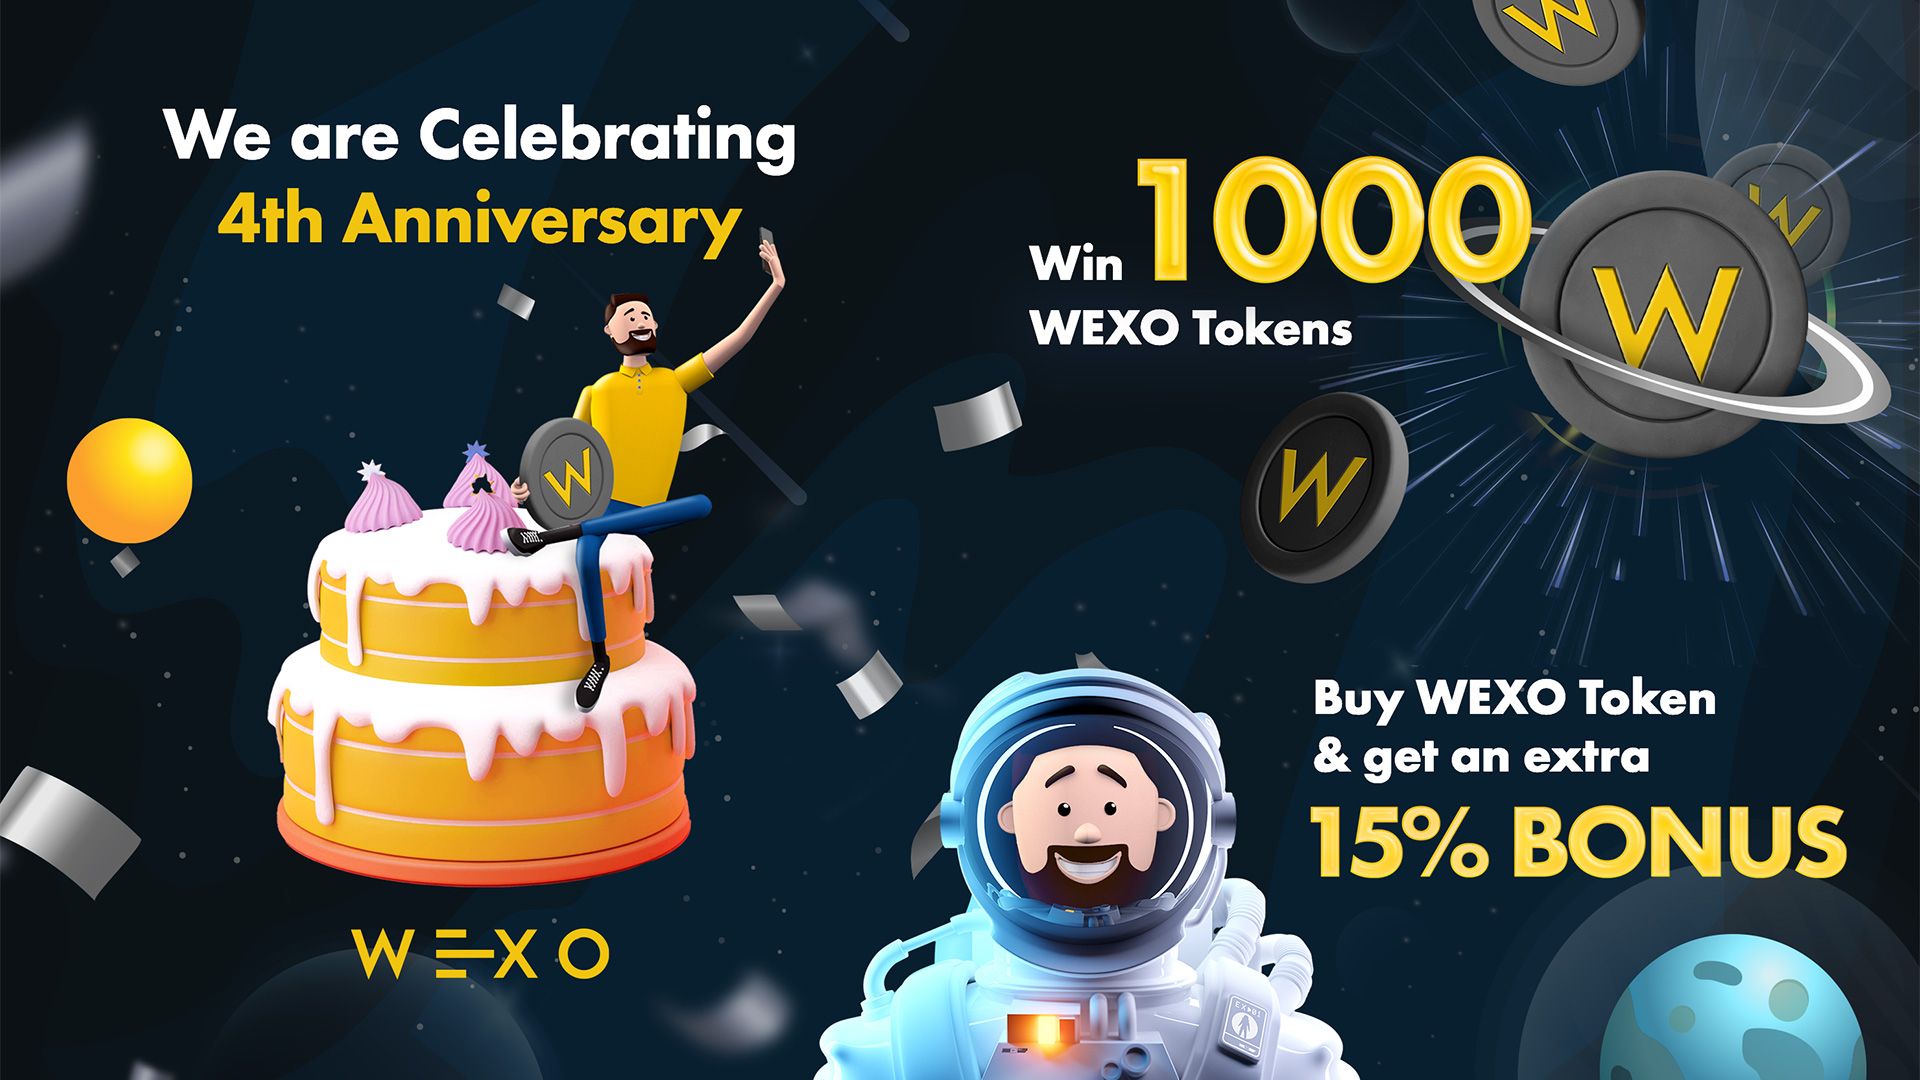 Celebrate our 4th anniversary with a competition for 2,000 WEXO Tokens 🎉